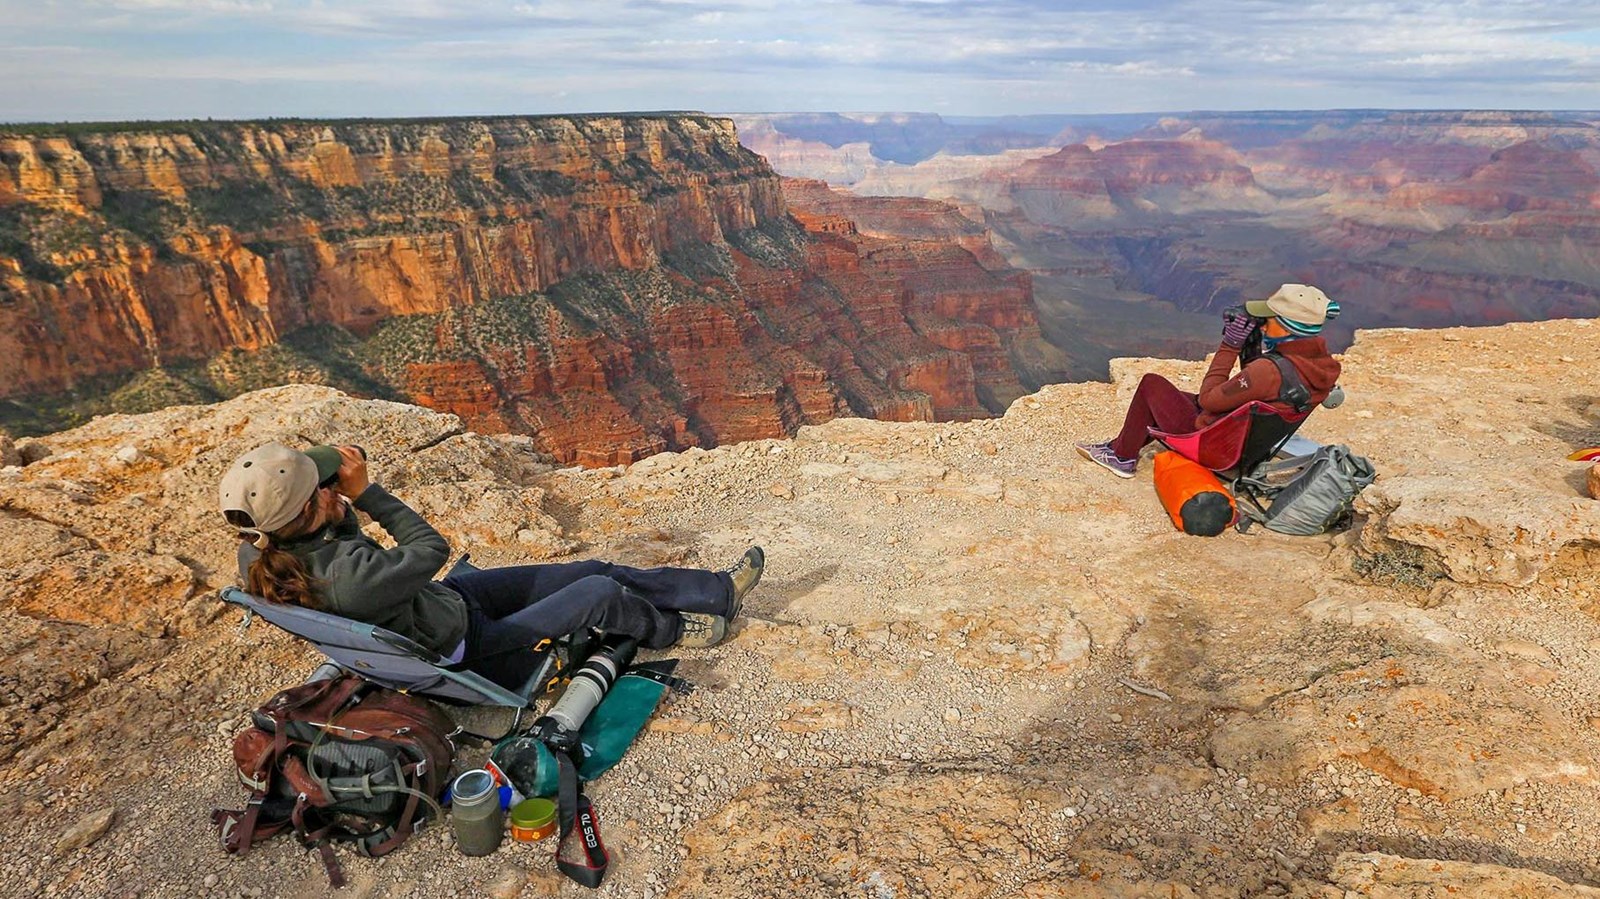  Two volunteers from Hawkwatch International recline in chairs near the edge of the canyon